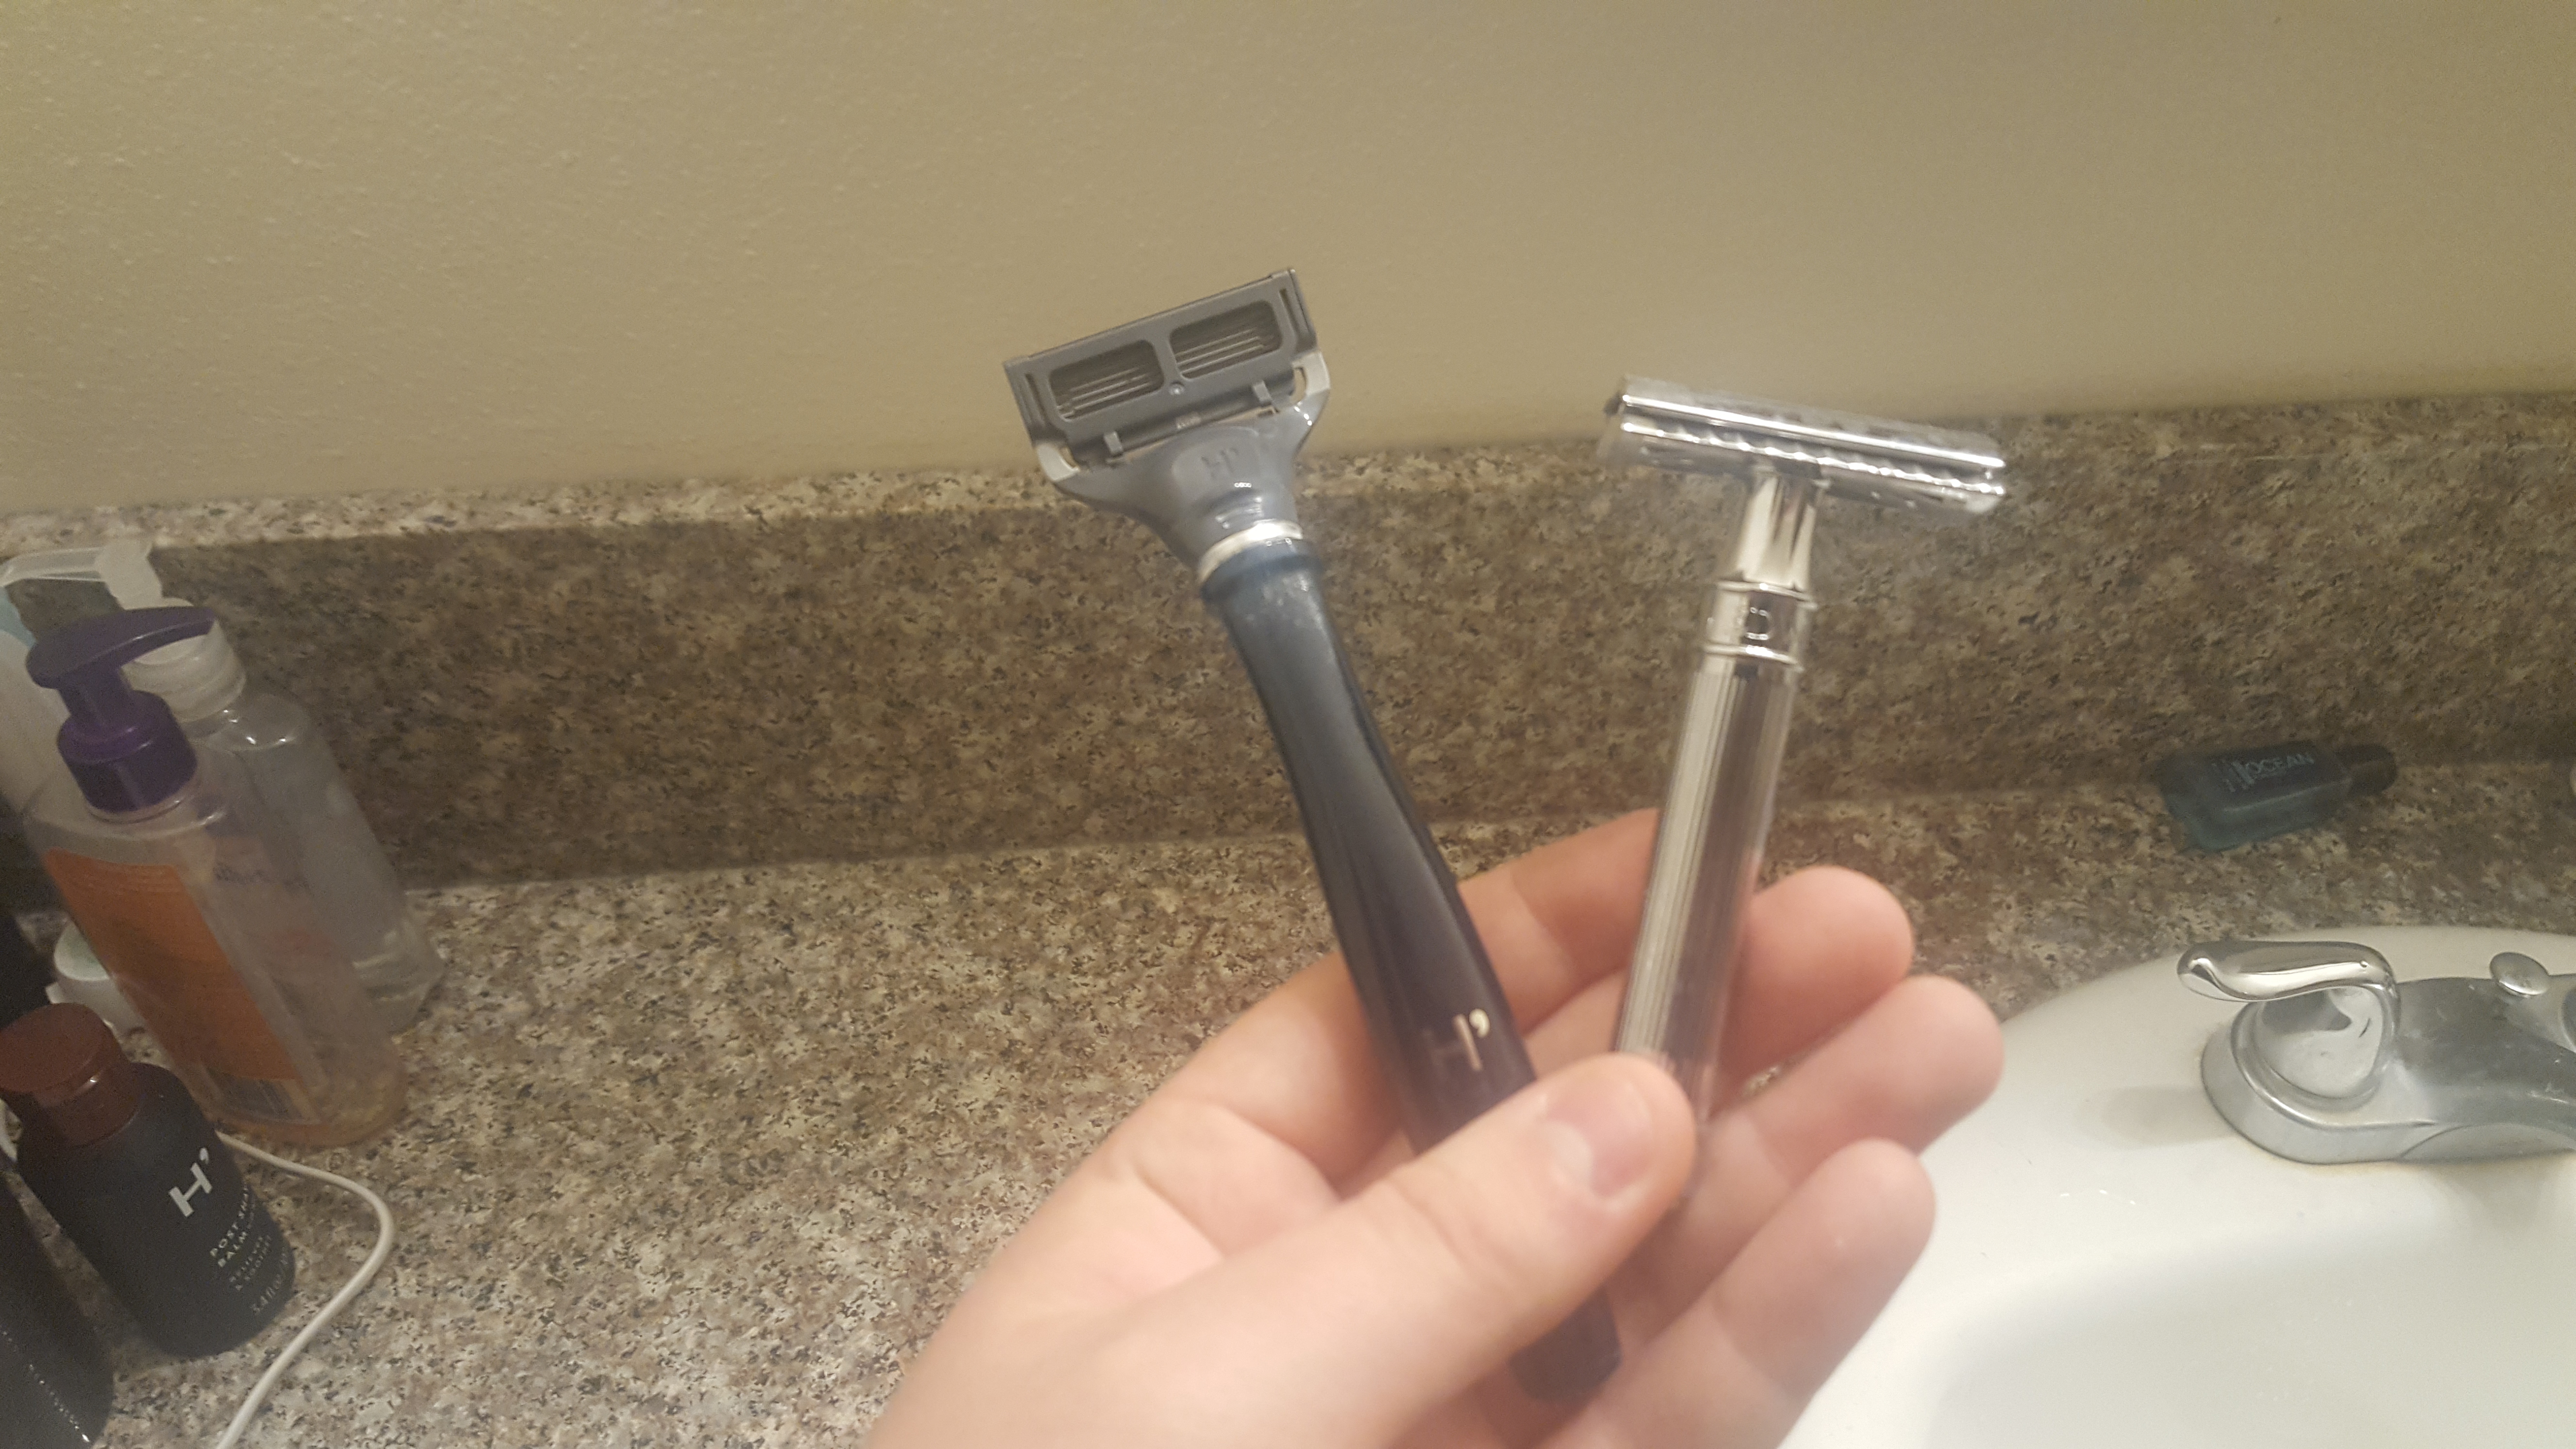 A cartridge razor and safety razor side by side.